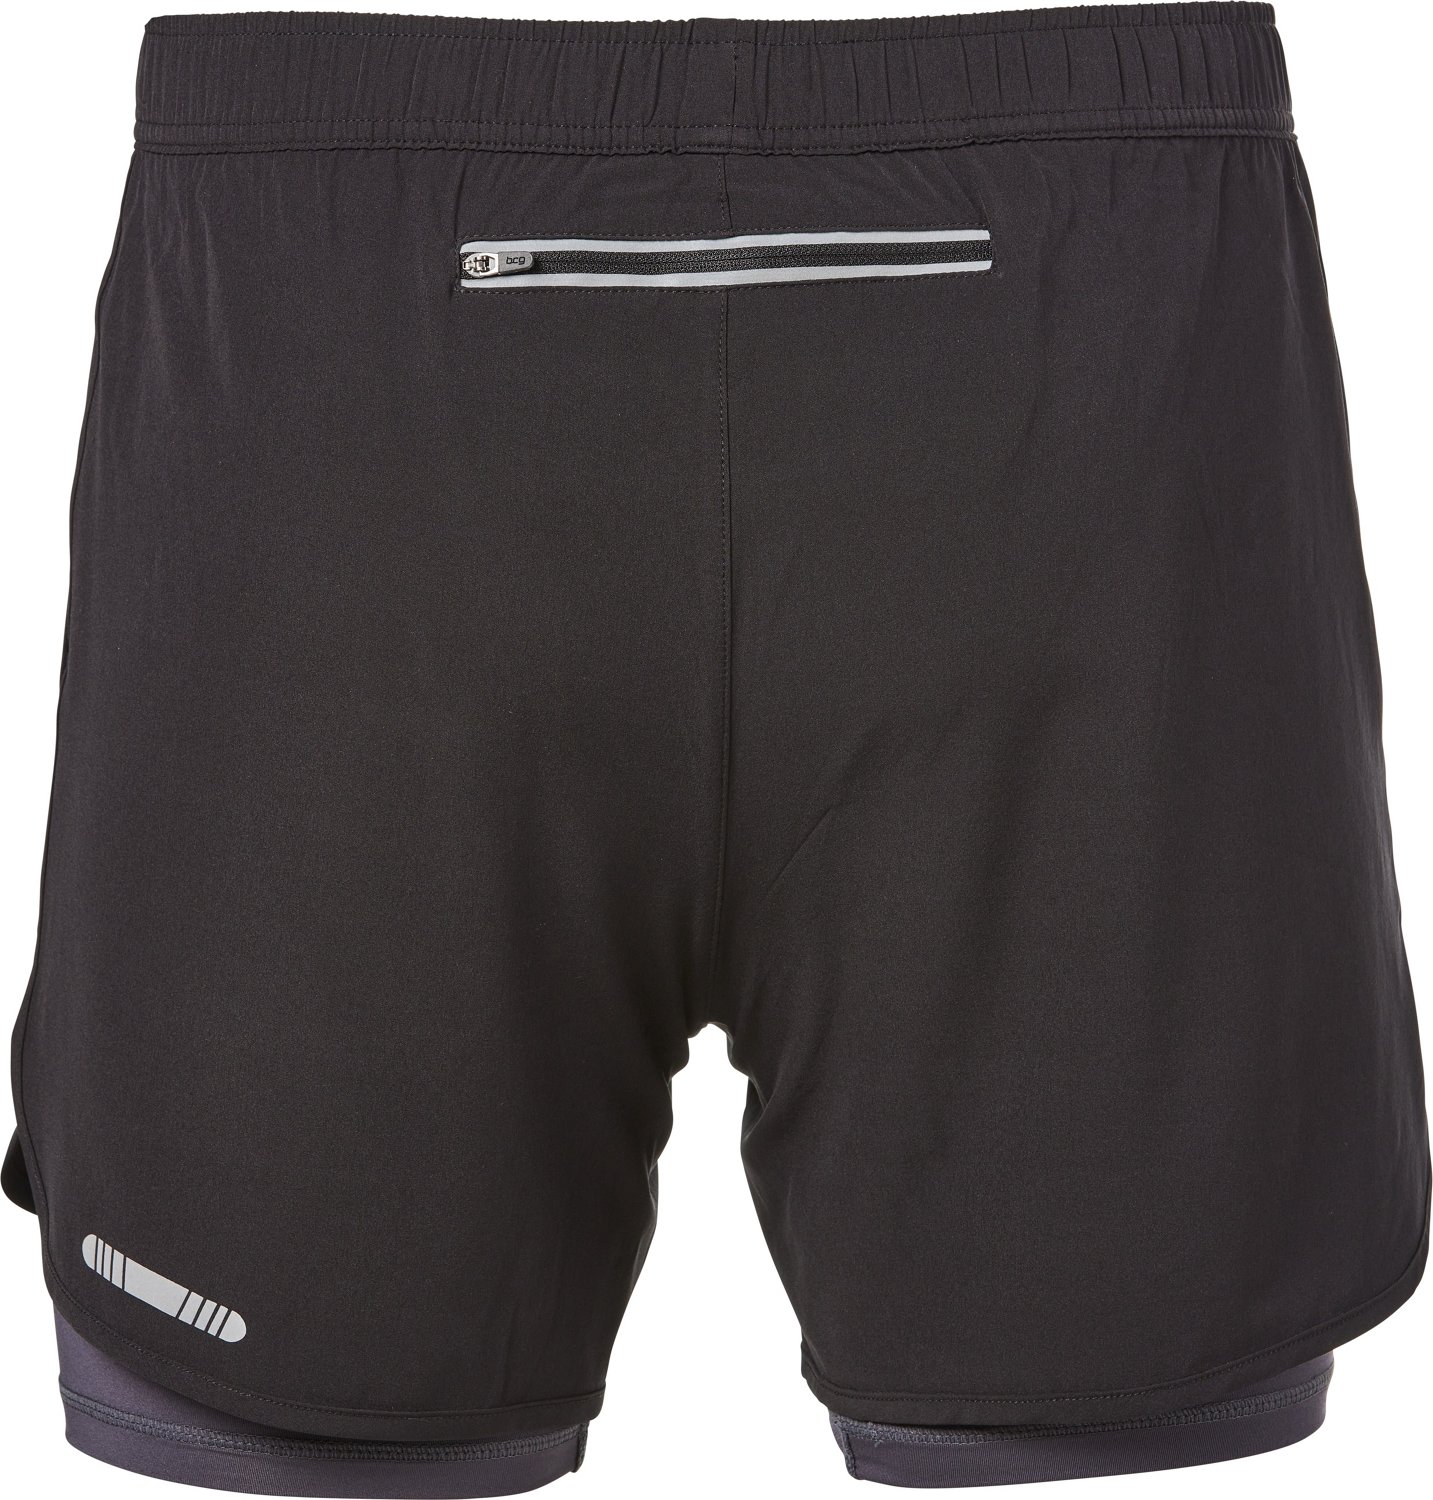 Boys Active Shorts Compression 2 in 1 Sports Pants with Pockets